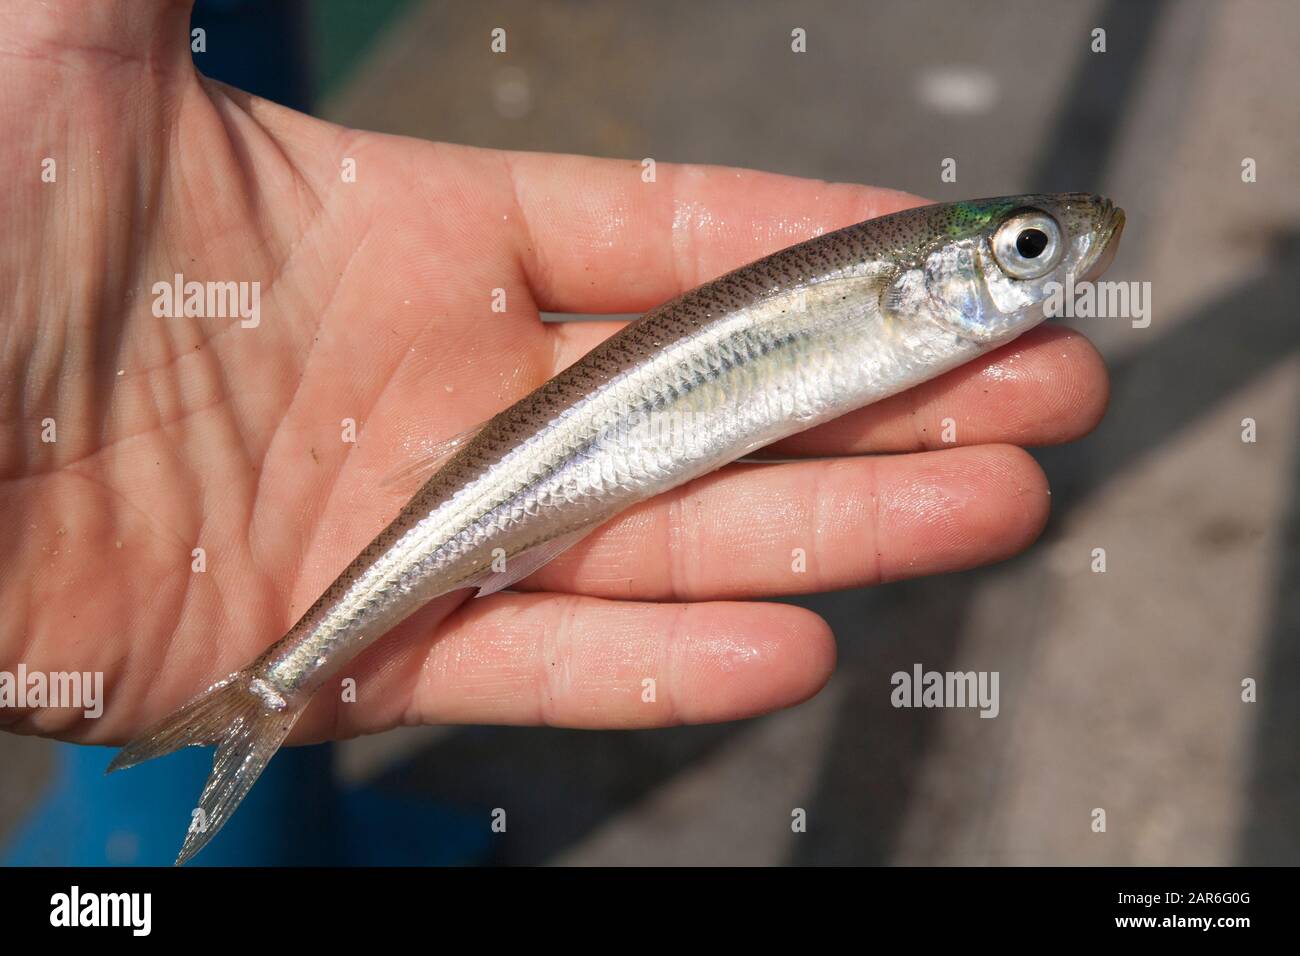 A Sand Smelt, Atherina presbyter, caught on rod and line from a pier. Dorset England UK GB. Stock Photo